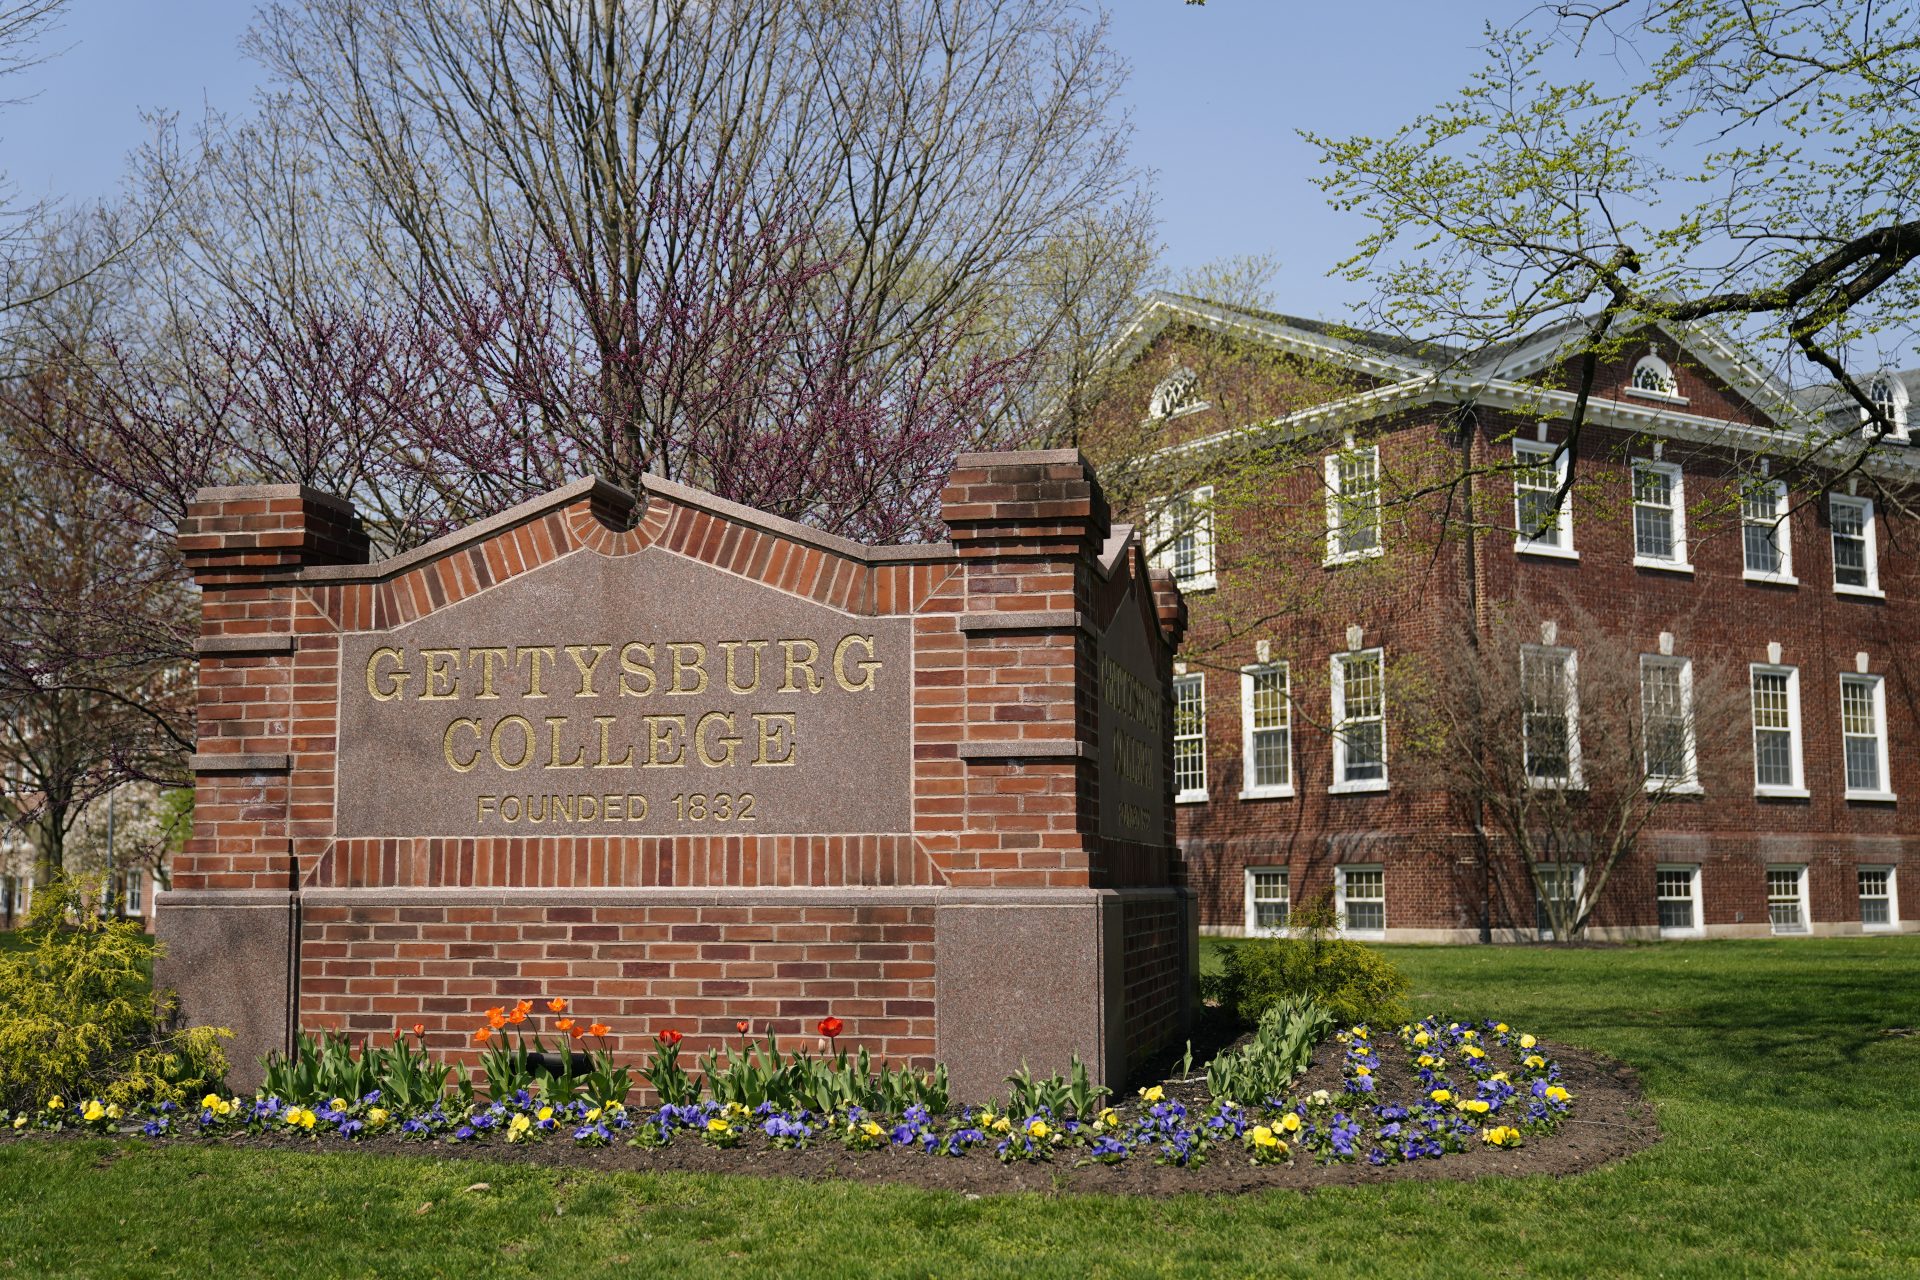 This Wednesday, April 7, 2021 photo shows the Gettysburg College campus in Gettysburg, Pa. A well-regarded school of about 2,400 students, Gettysburg is far from alone in reporting a troubling number of campus sex assaults under the 1990 Clery Act.